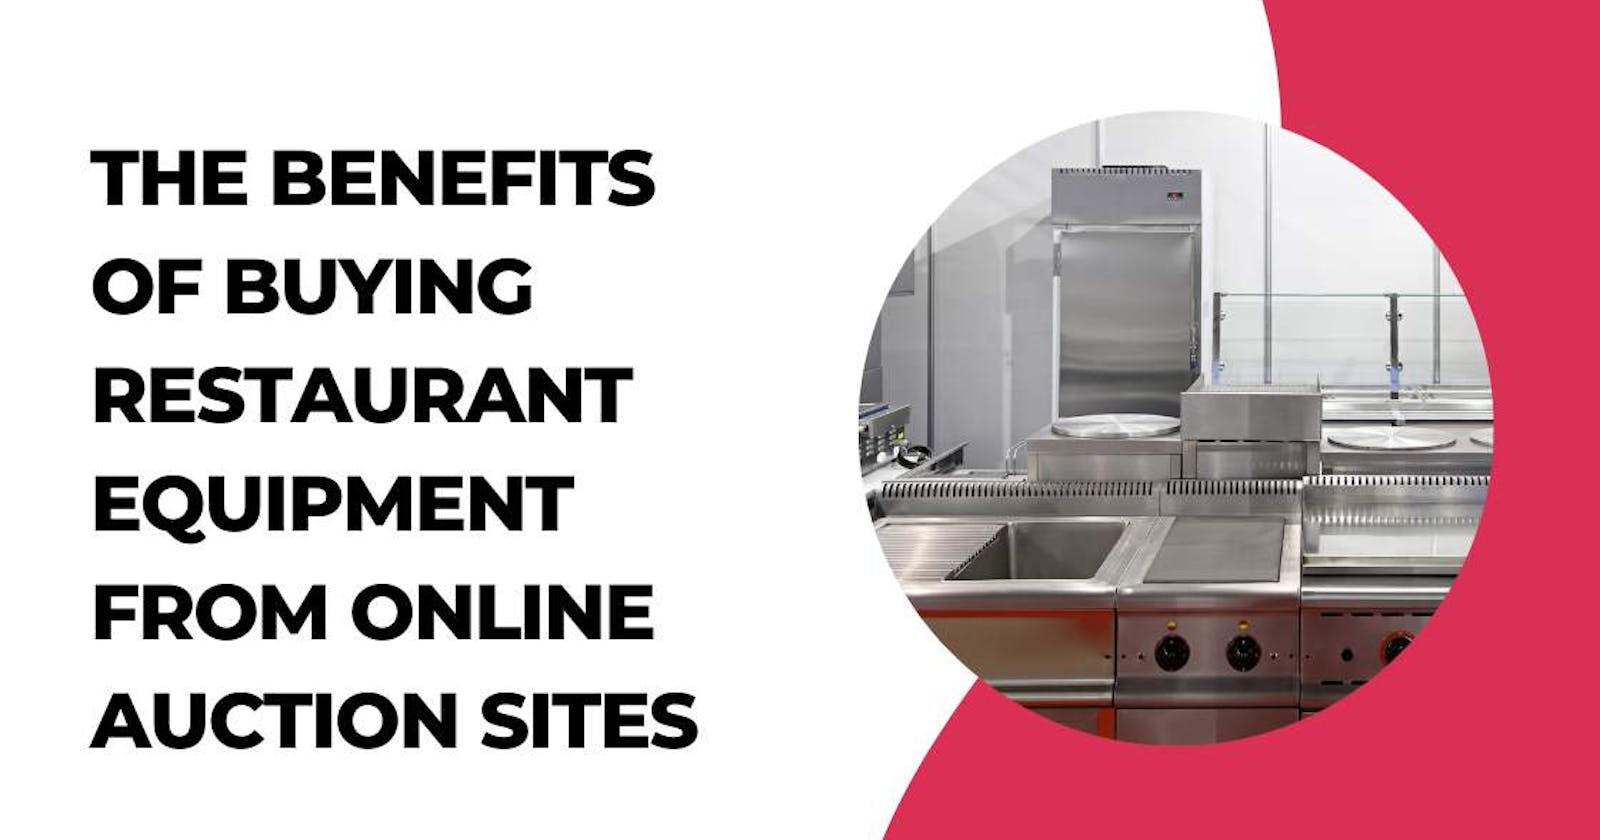 The Benefits of Buying Restaurant Equipment from Online Auction Sites